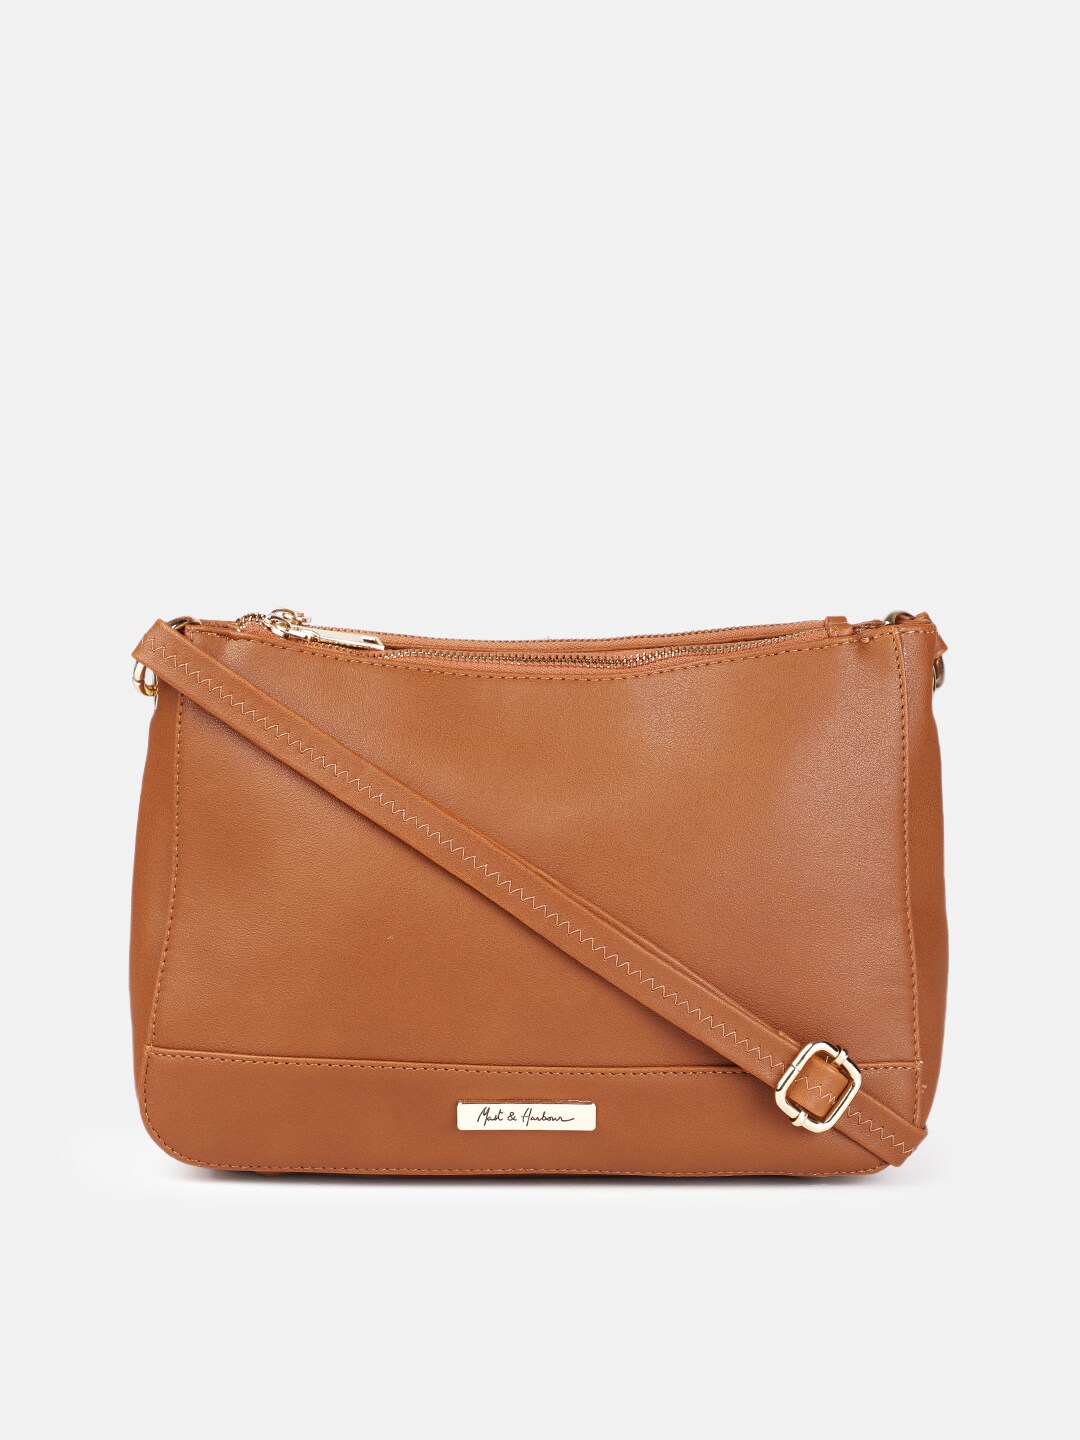 Mast & Harbour Tan Solid Structured Sling Bag Price in India